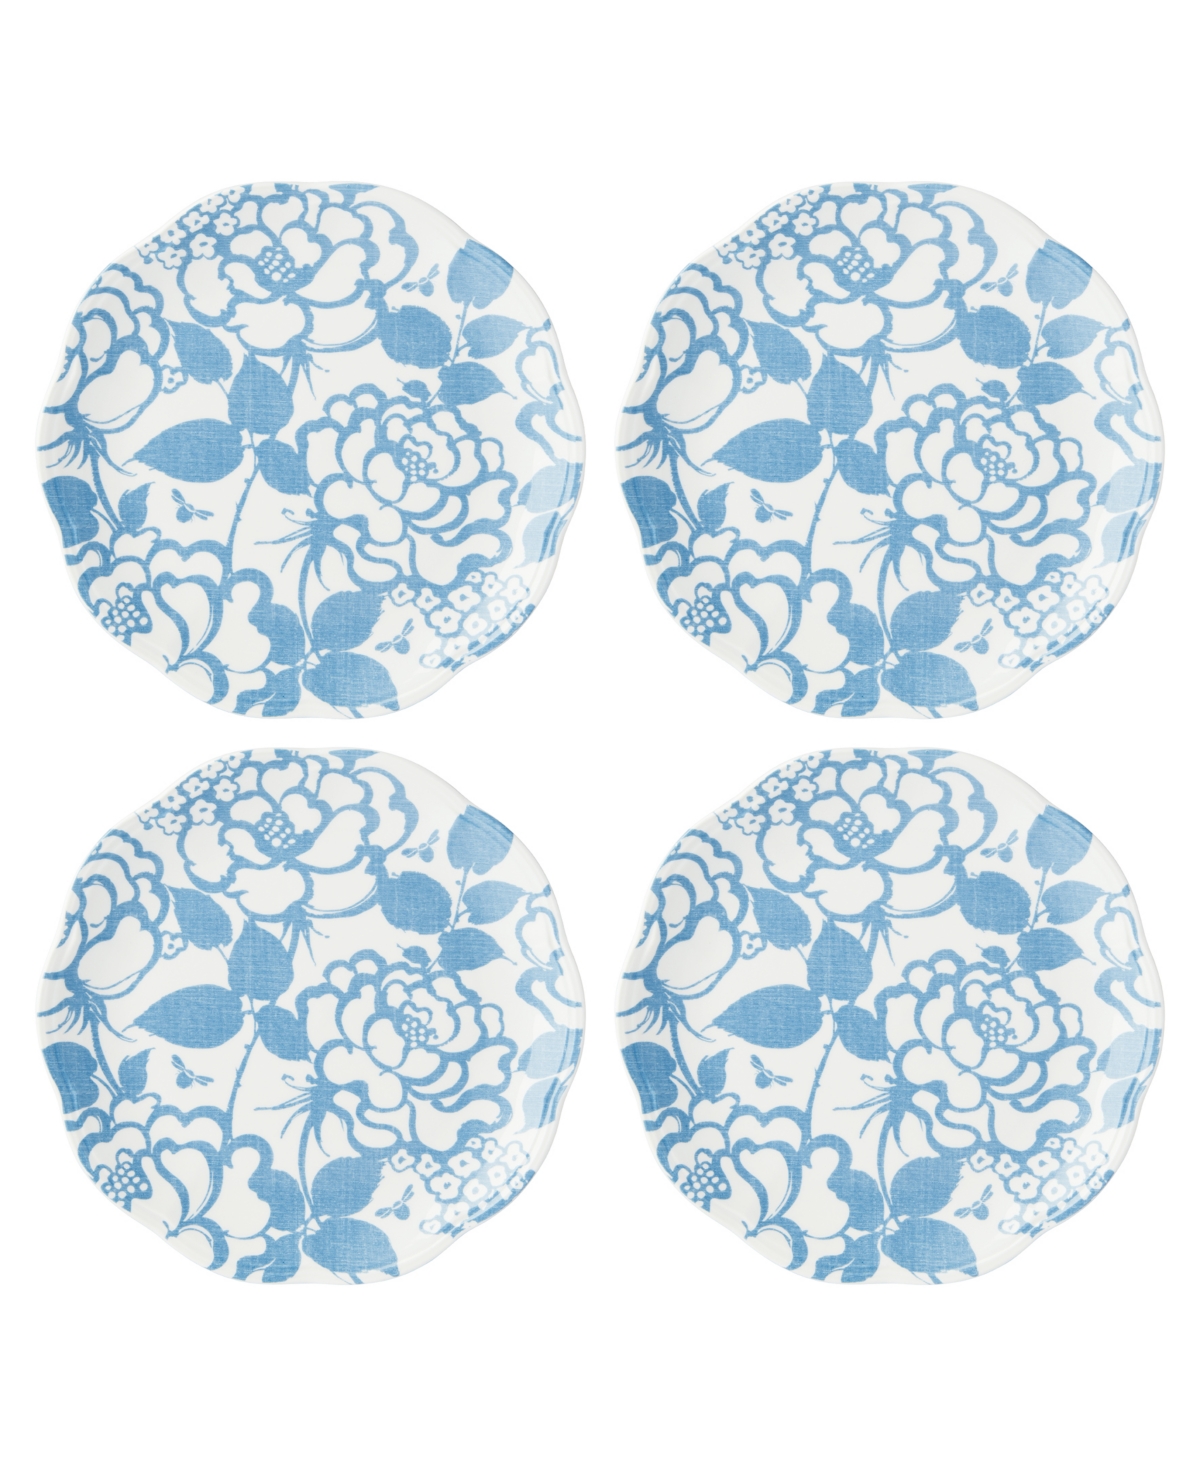 Lenox Butterfly Meadow Cottage Accent Plate Set, Set Of 4 In Cornflower Hue